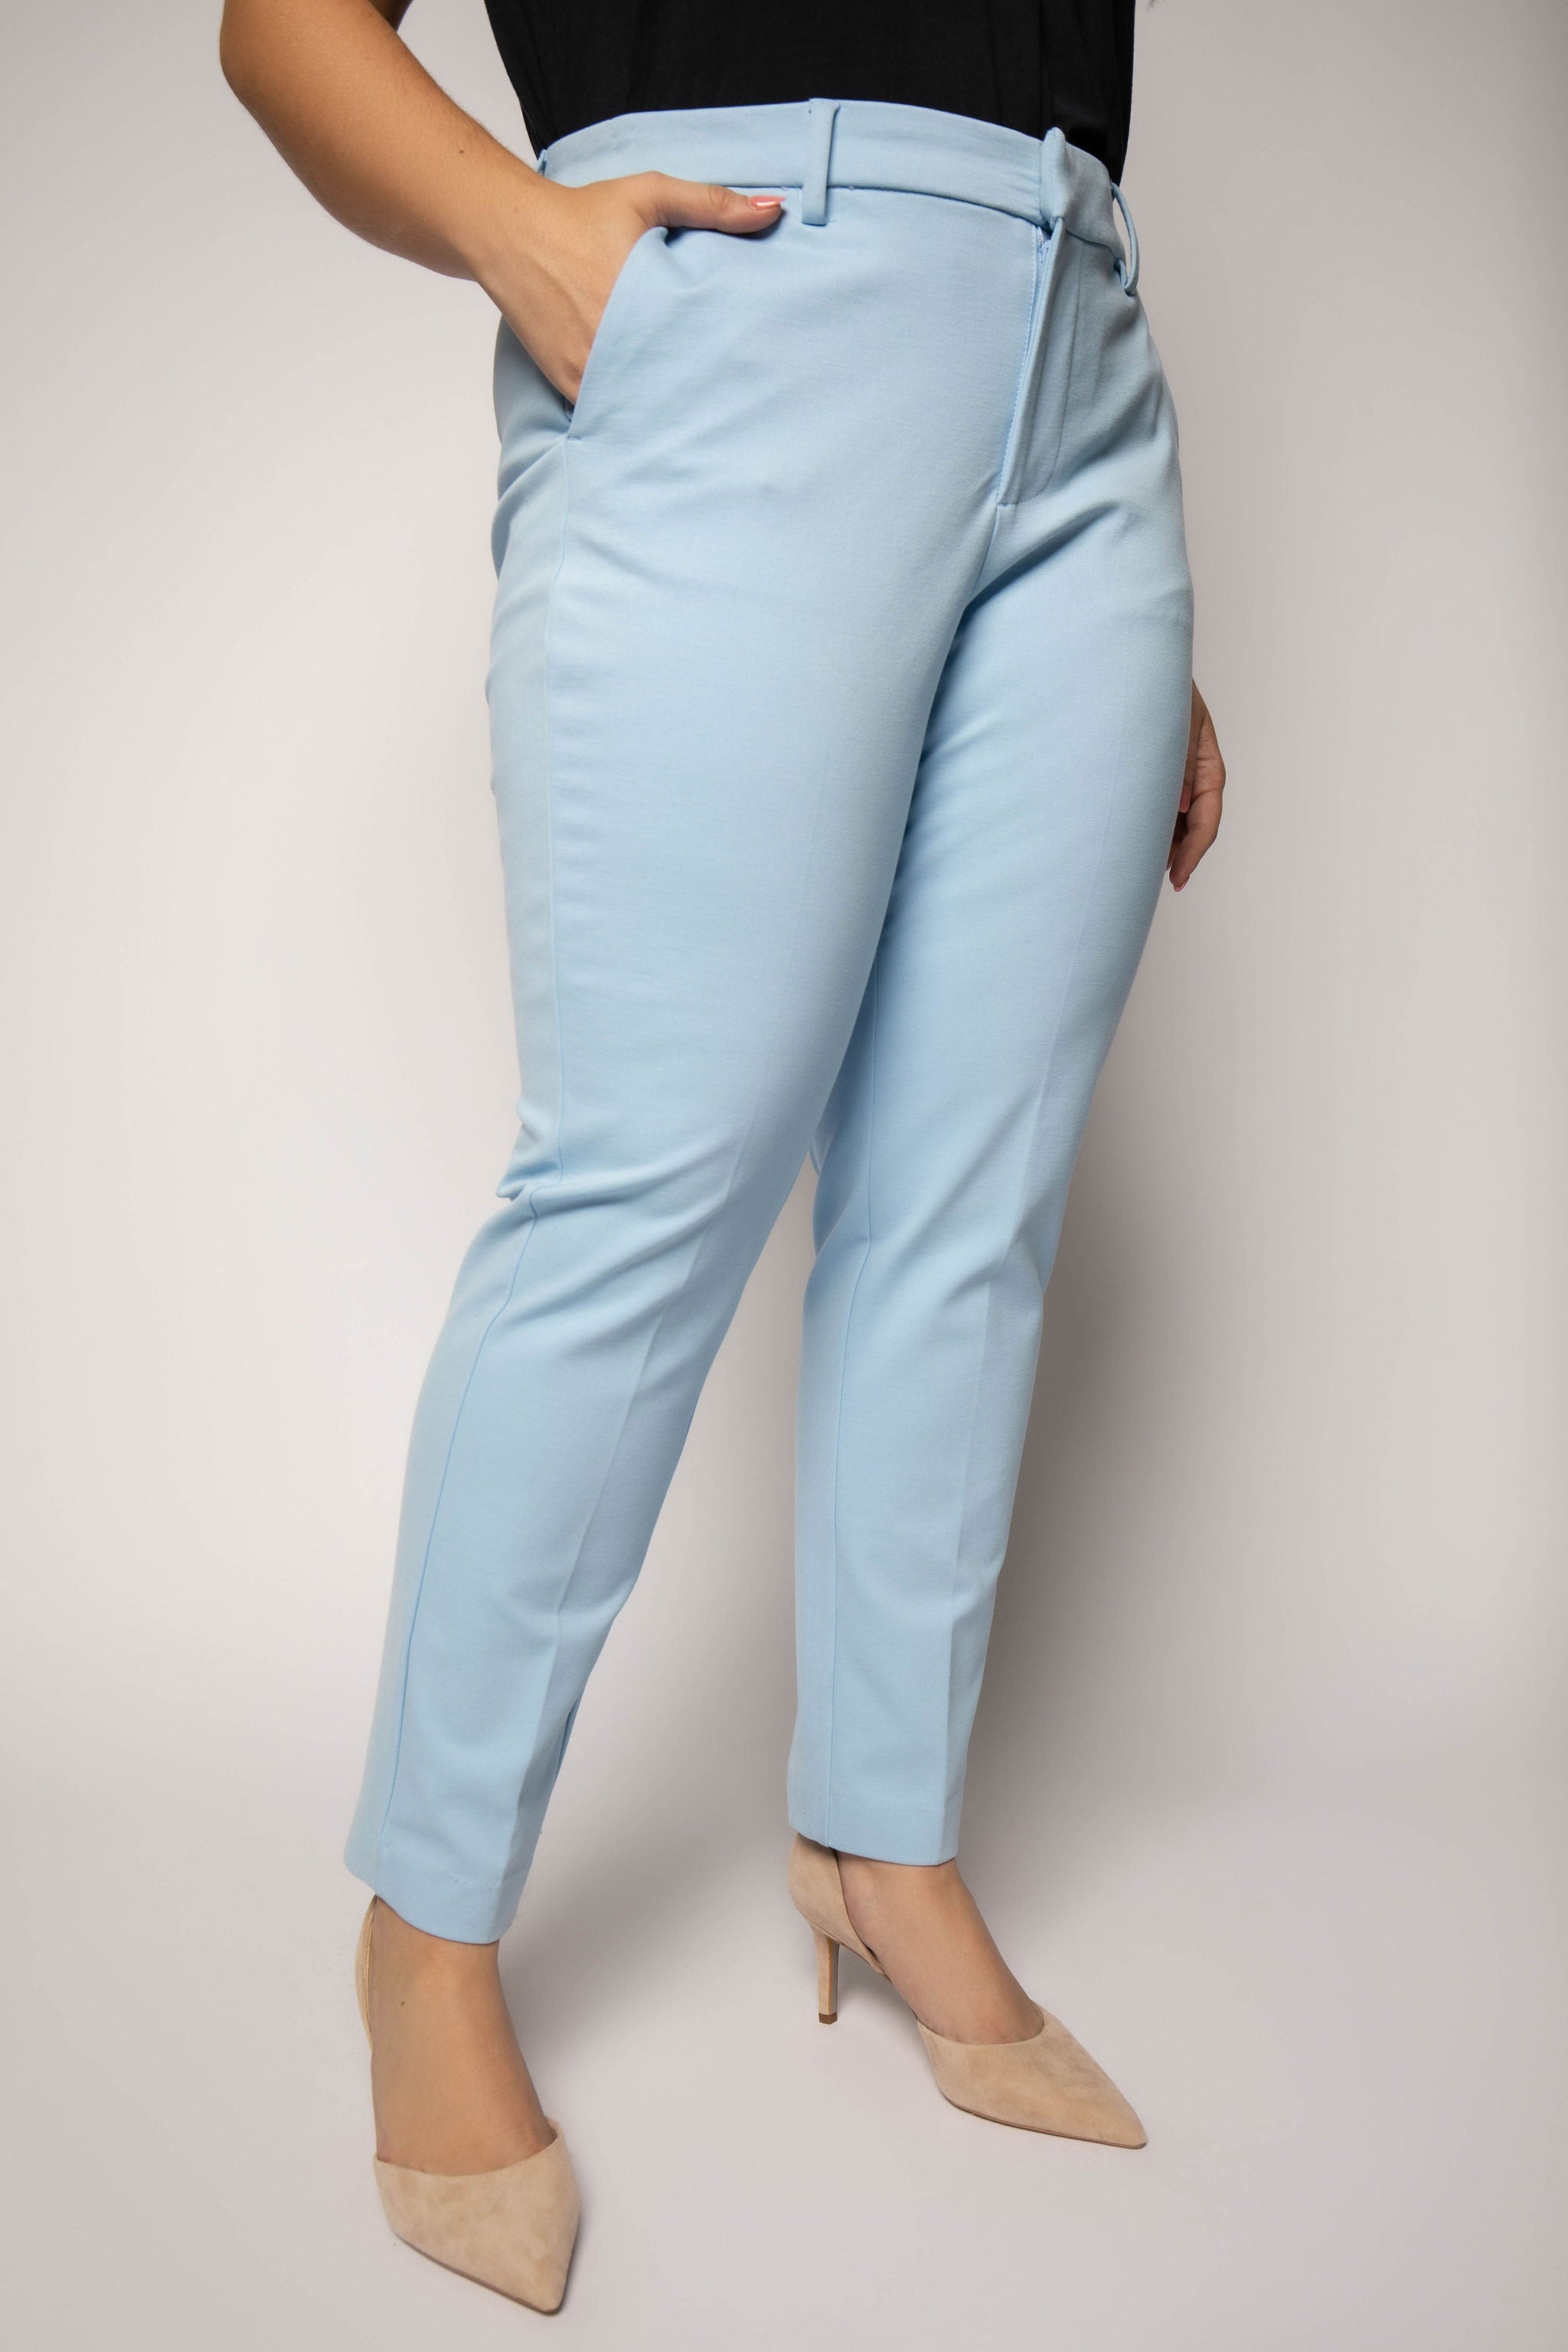 KELSEY TROUSER - AMOUR781